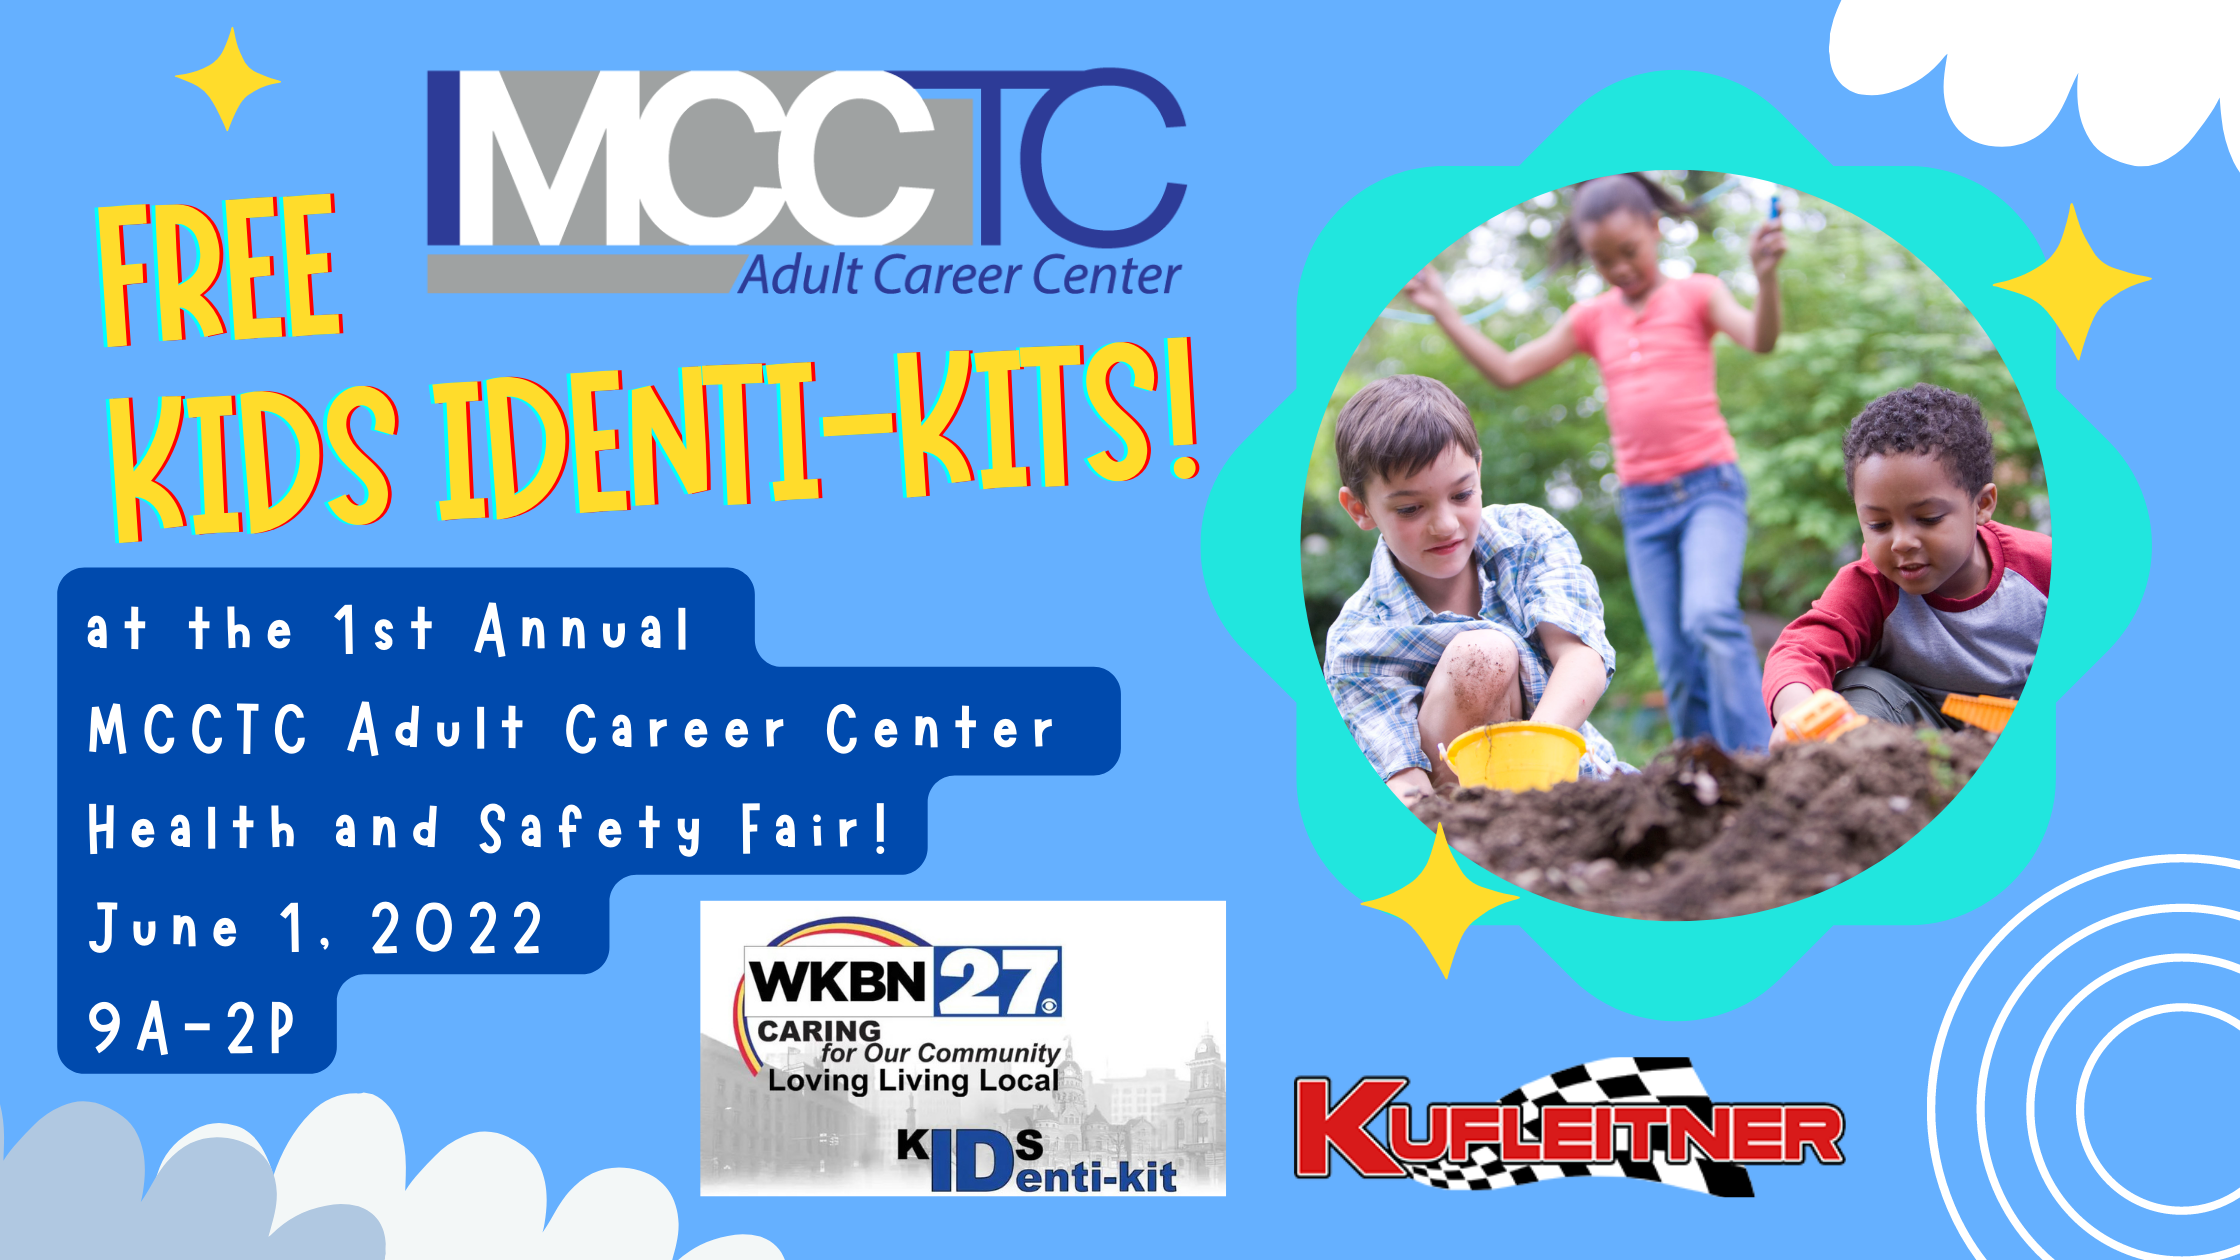 Get your kids ready for summer with a FREE Kids Identi-kit while visiting the MCCTC Adult Career Center Health and Safety Fair